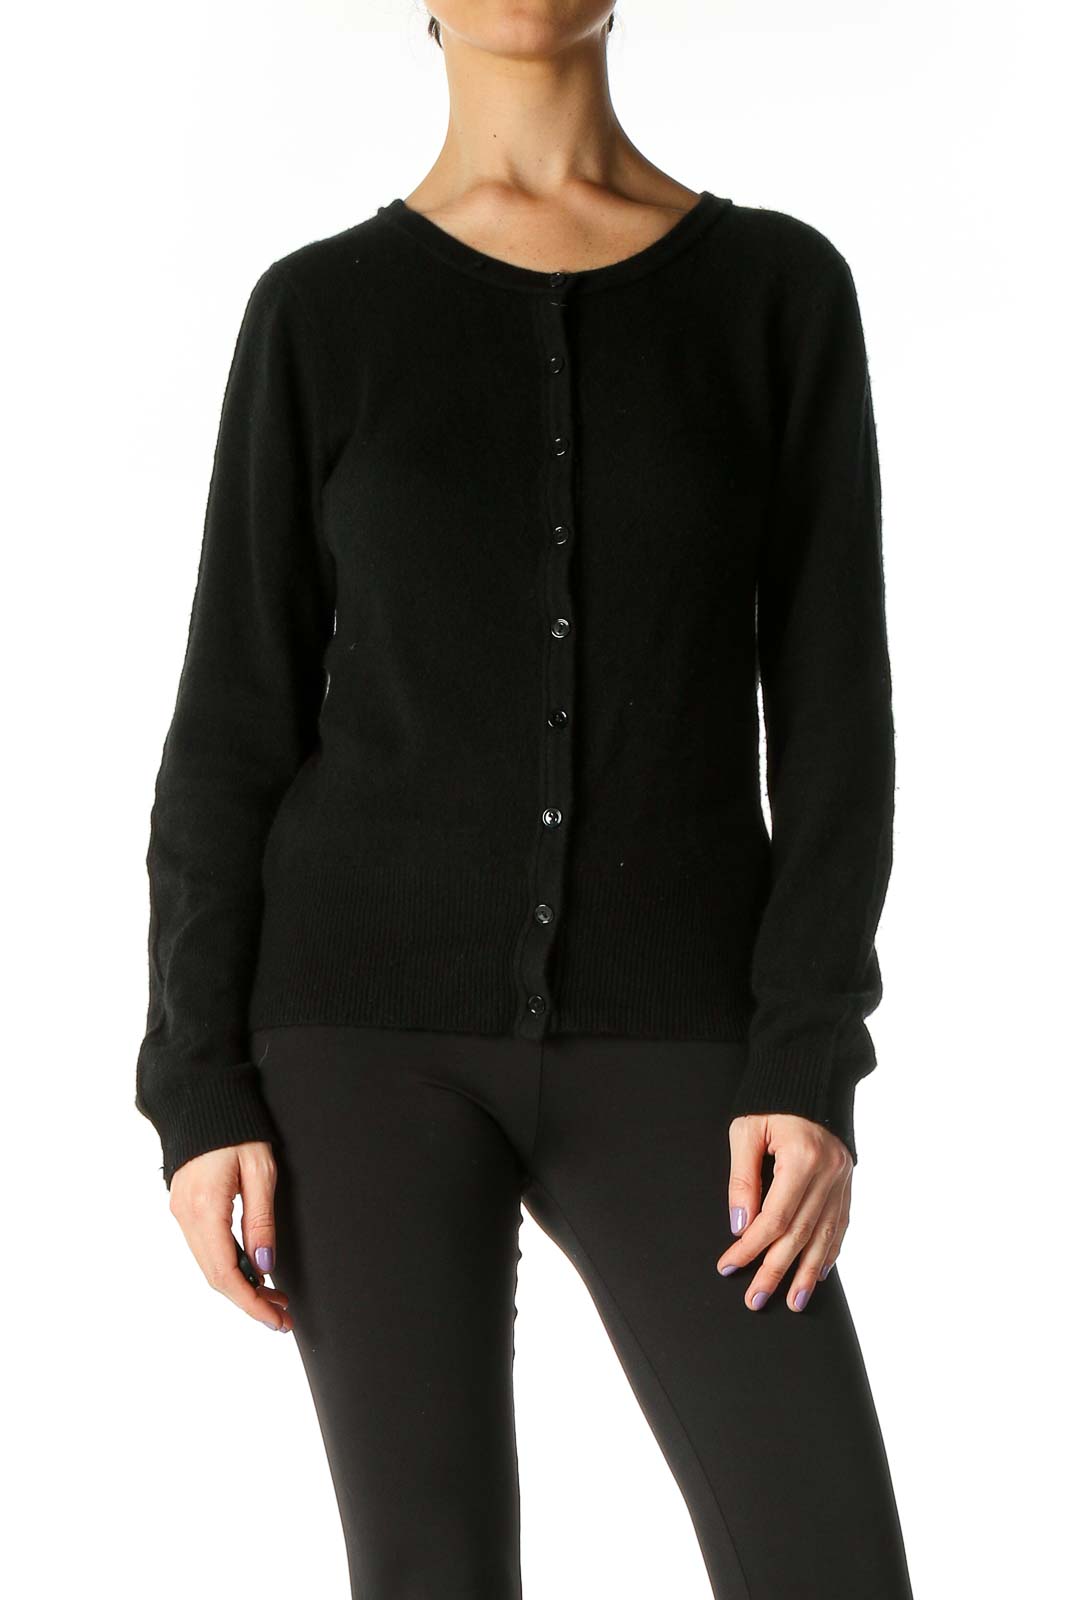 Black Solid Formal Sweater Front